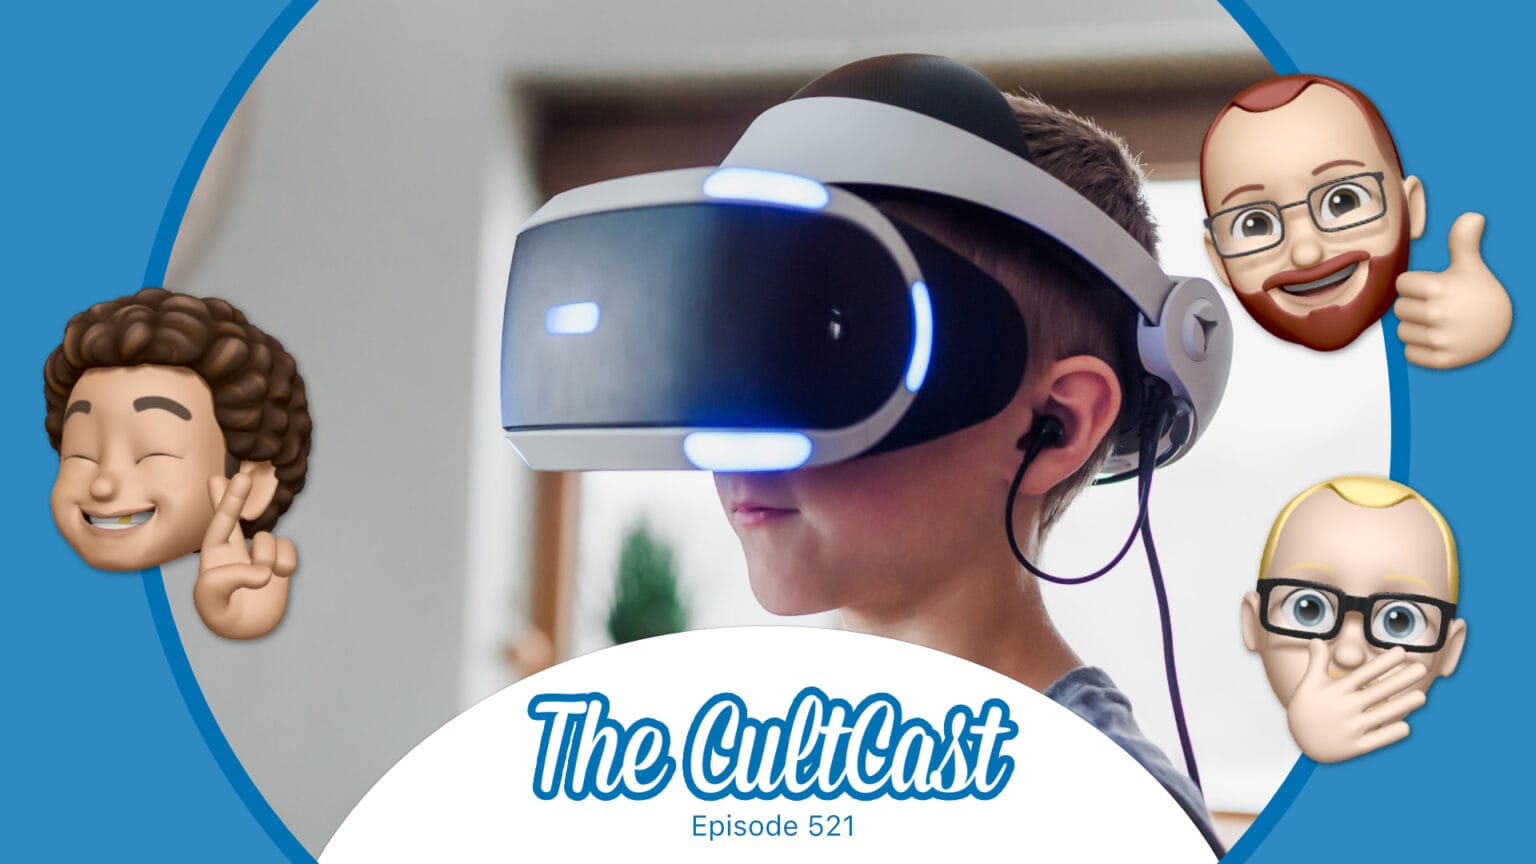 The CultCast: Are you ready for Apple VR headset?